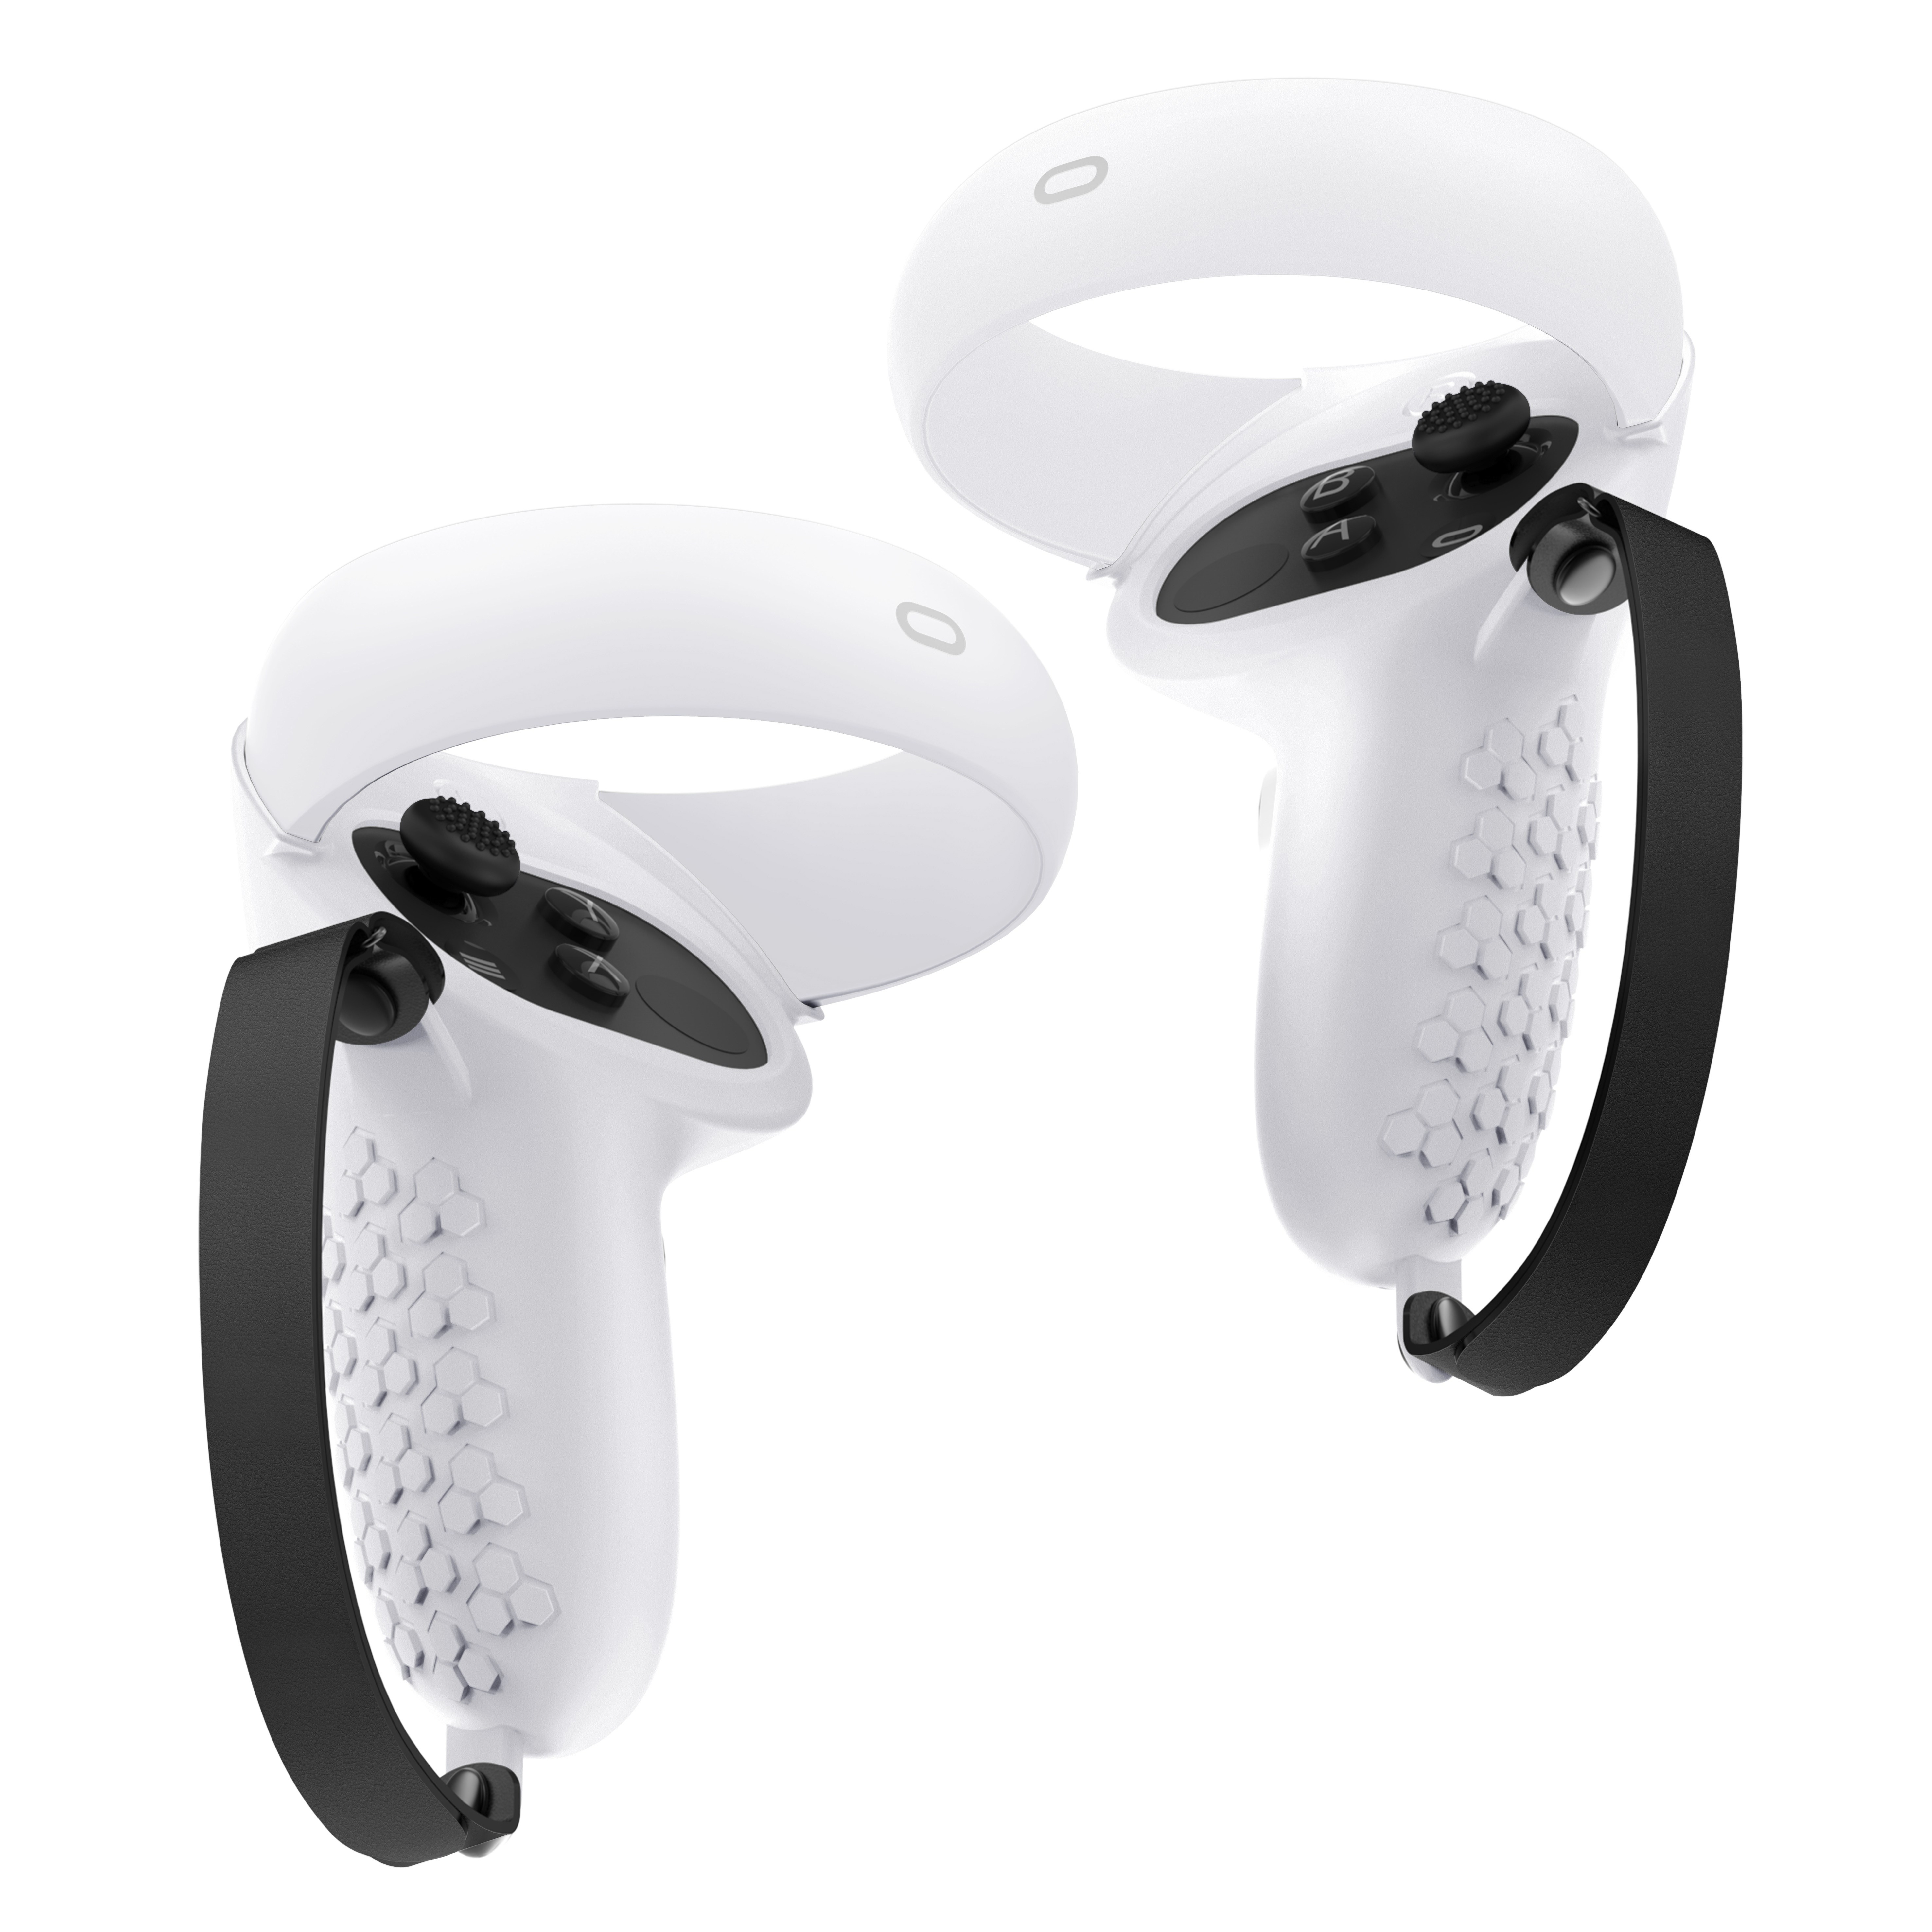 KIWI design Upgraded Controller Grips Cover Compatible with Oculus Quest 2  Meta Quest 2 Accessories, with Battery Opening Protector with Knuckle  Straps (White) 